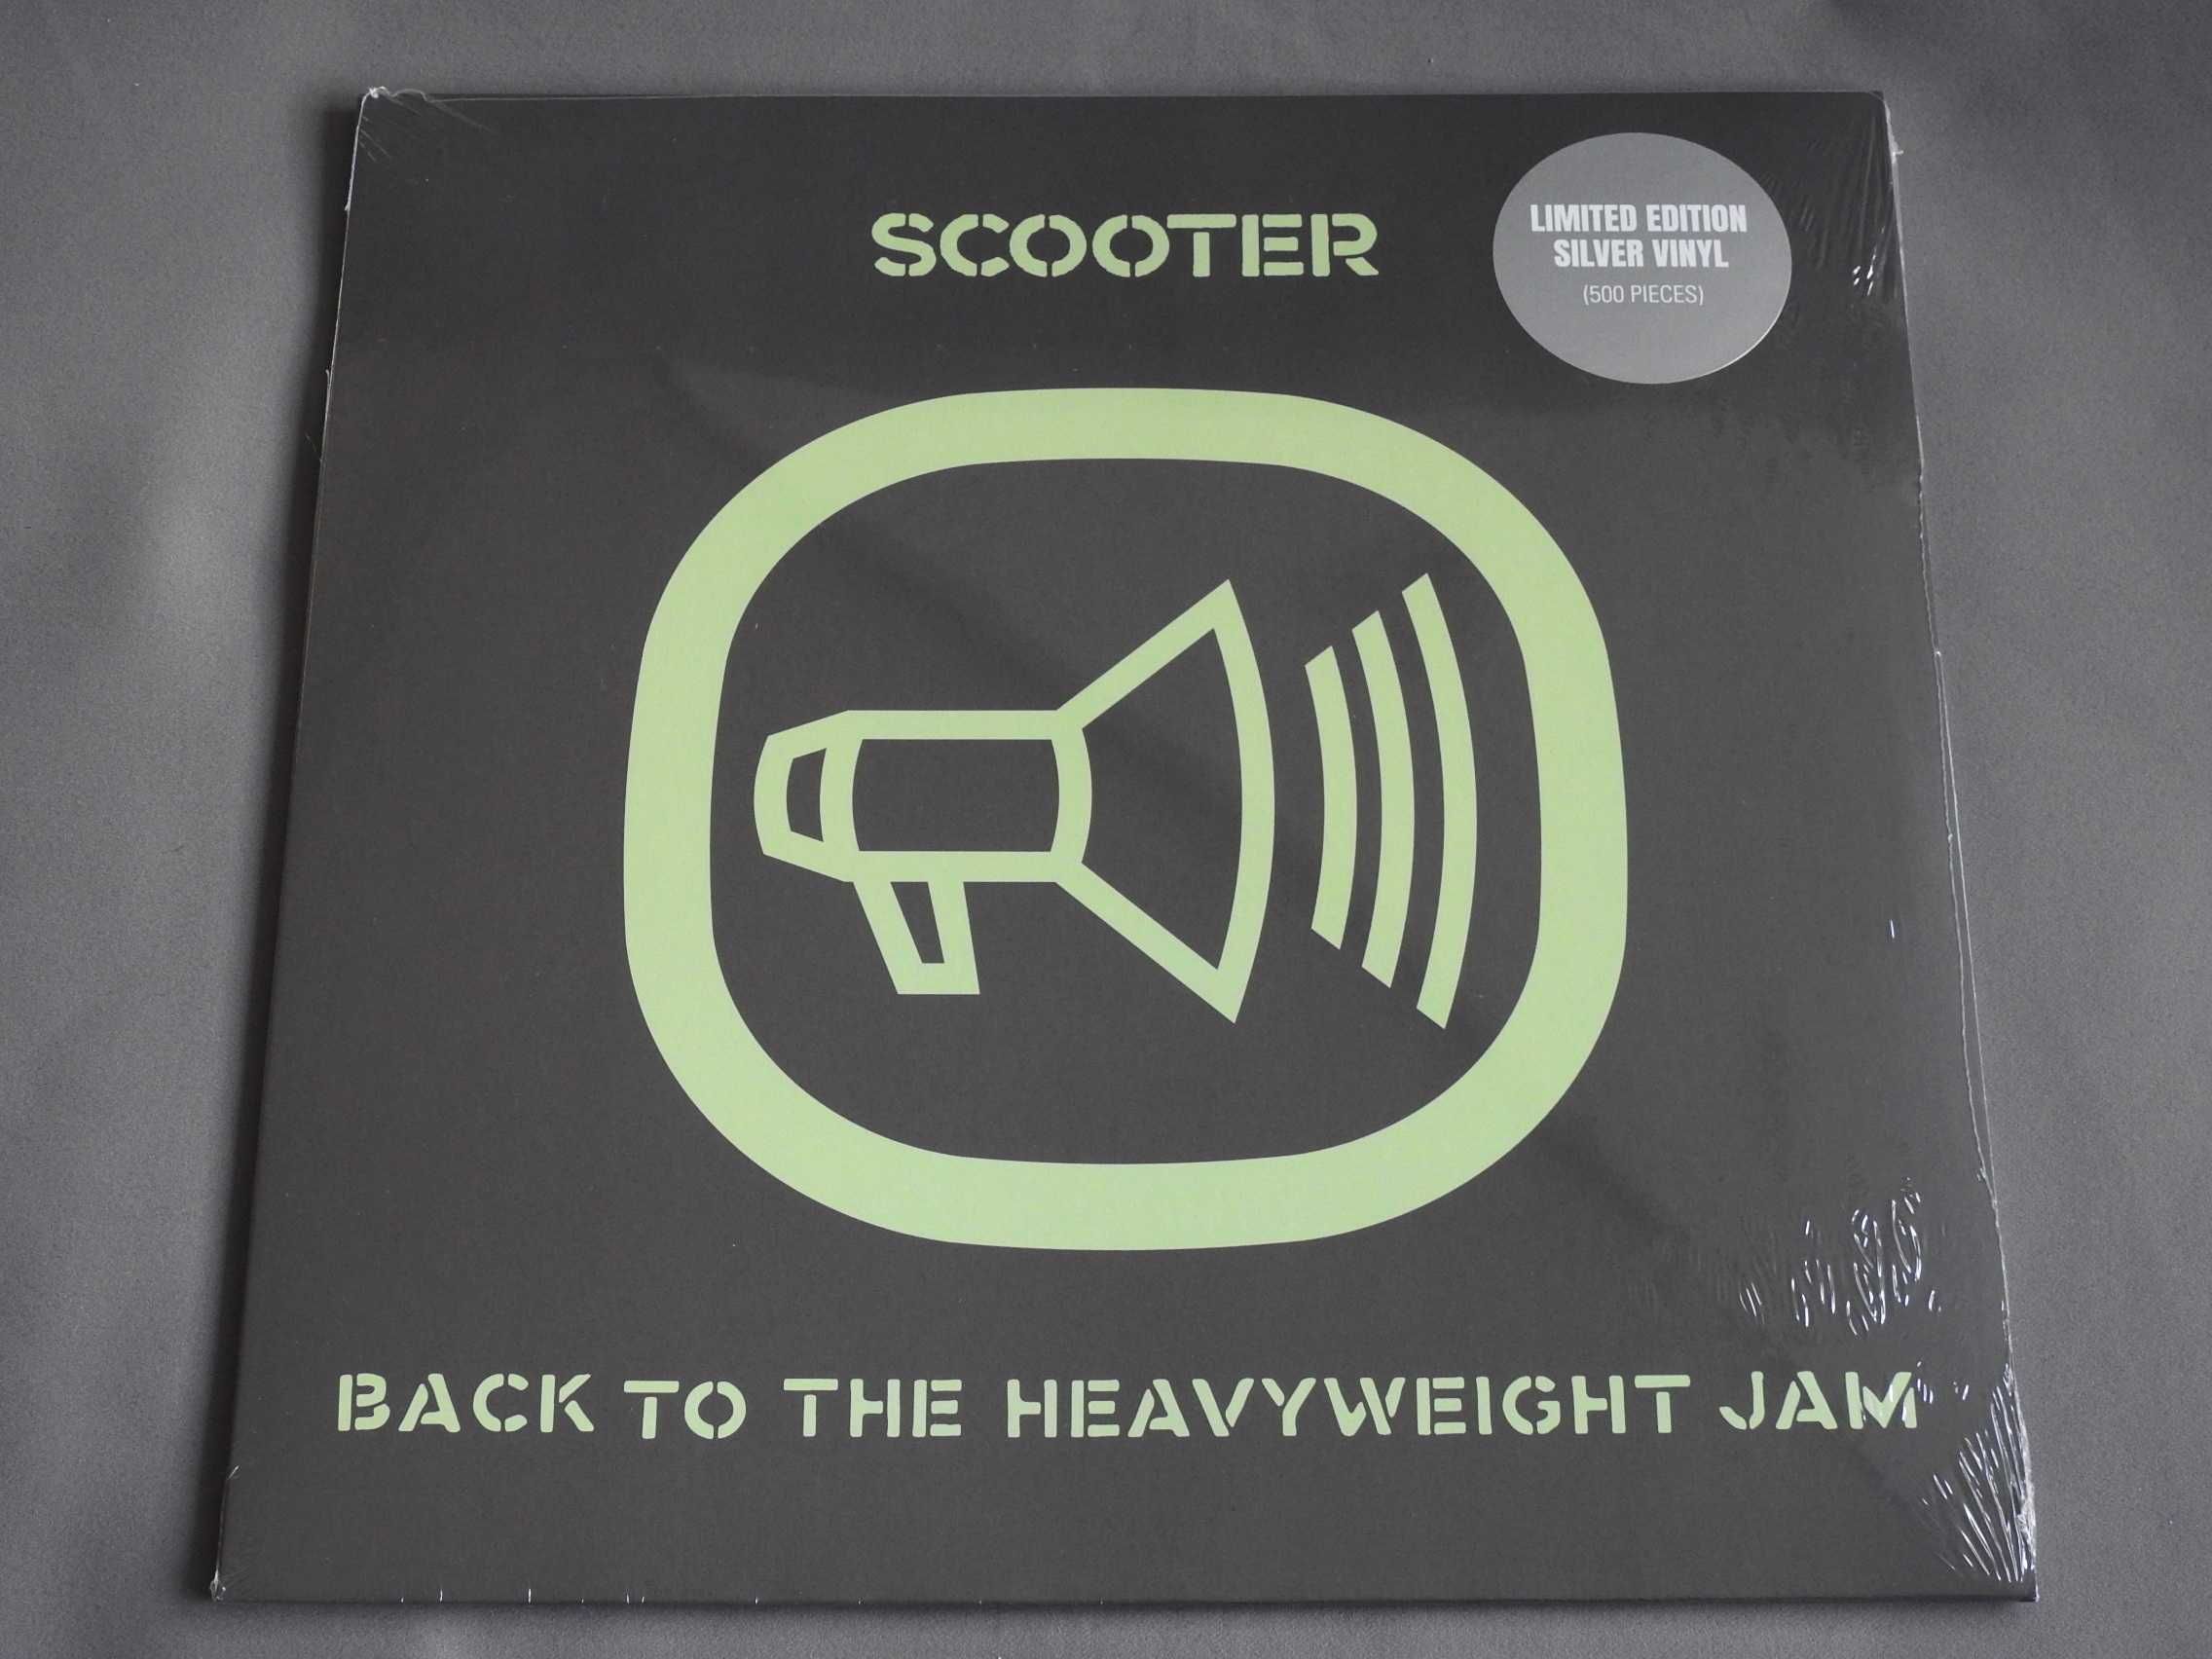 Scooter Back To The Heavyweight Jam LP пластинка 1999/2022 SEALED Silv